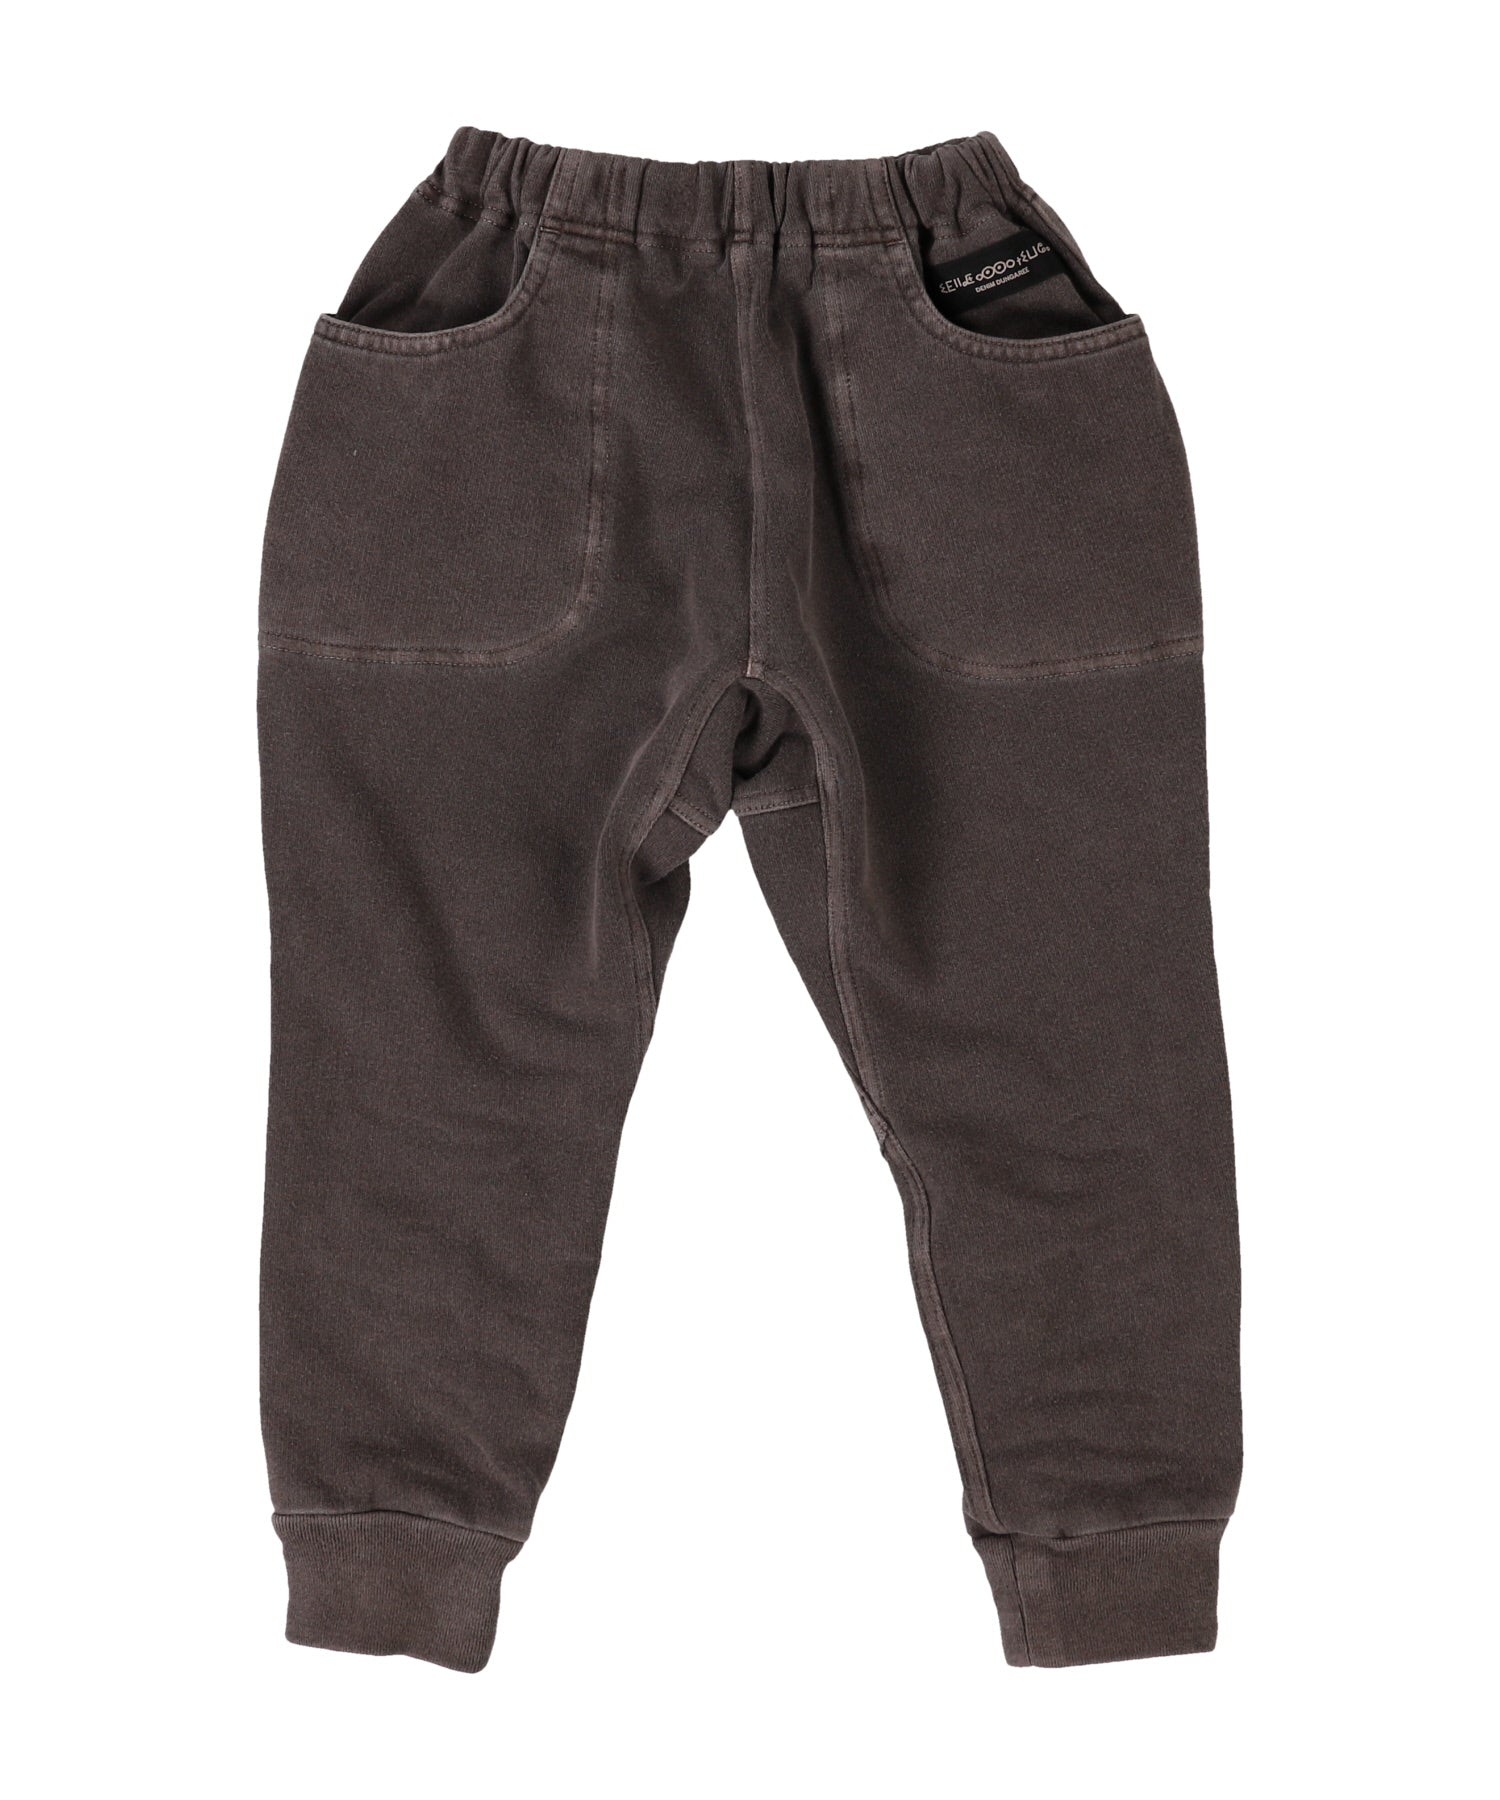 Dyed Stretch Knickerbockers - Shan and Toad - Luxury Kidswear Shop